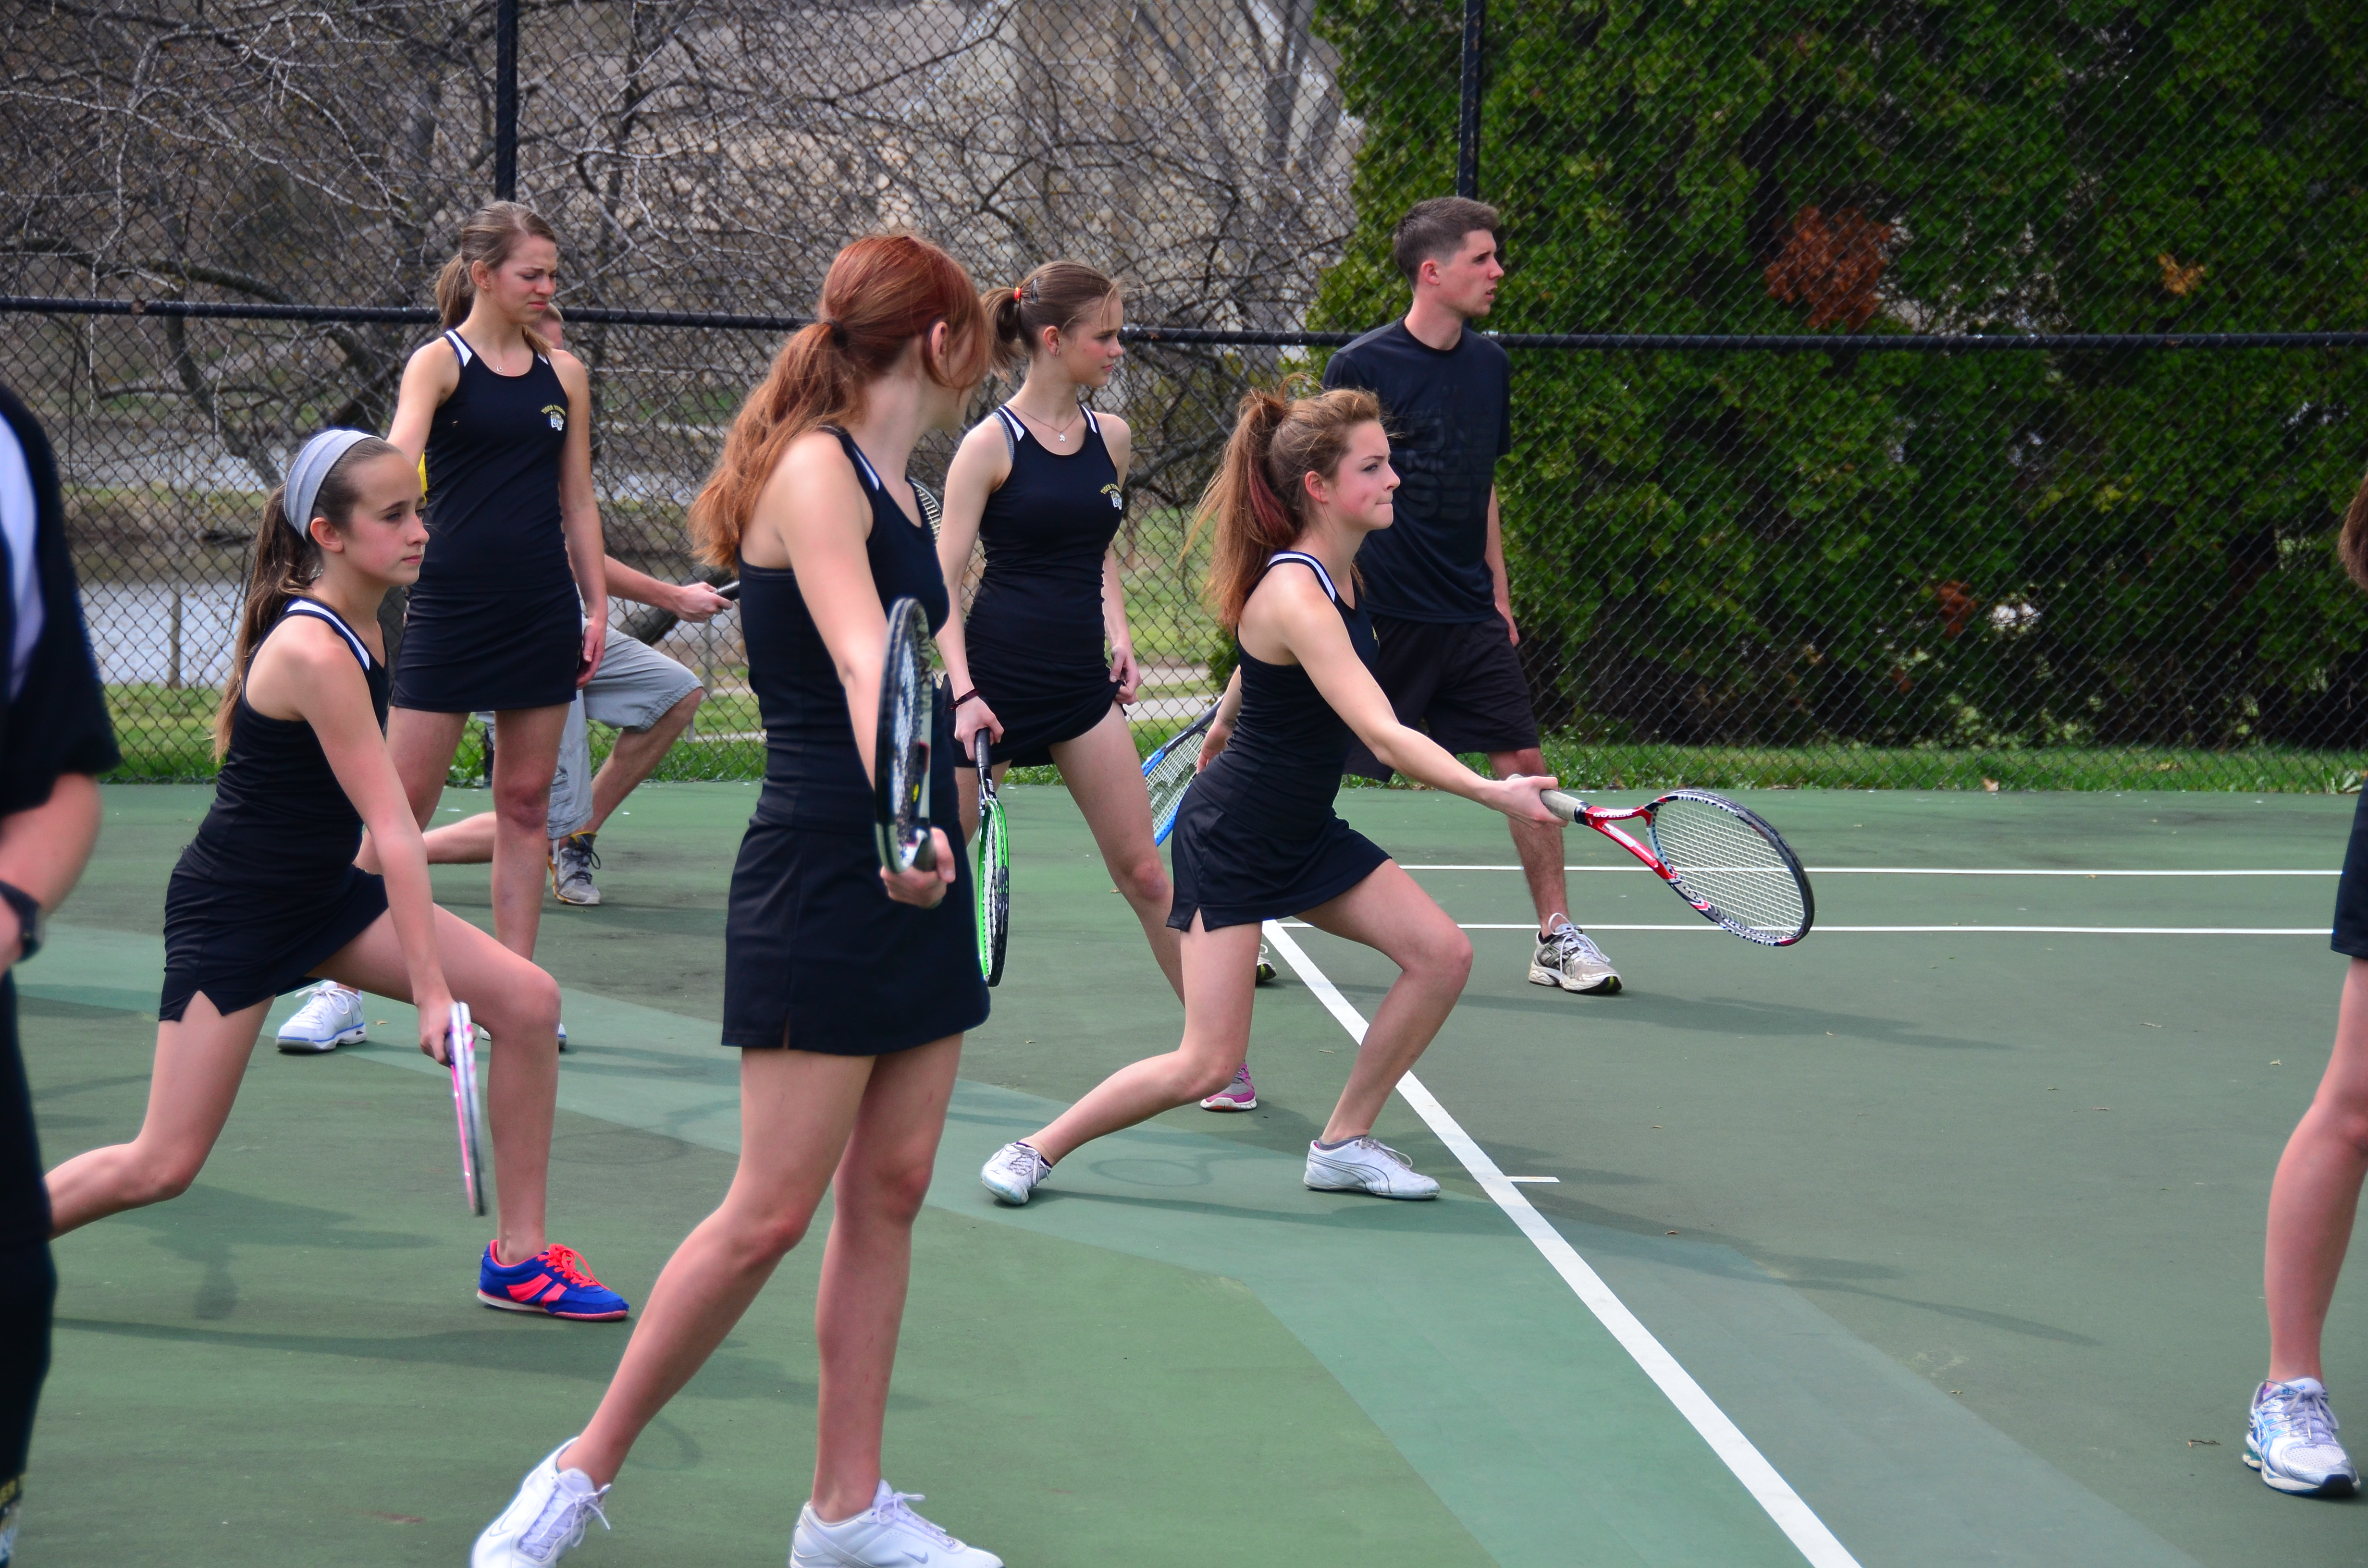 The Tigers Tennis team practices at Carmel Rac- quet Club. (Submitted photo)